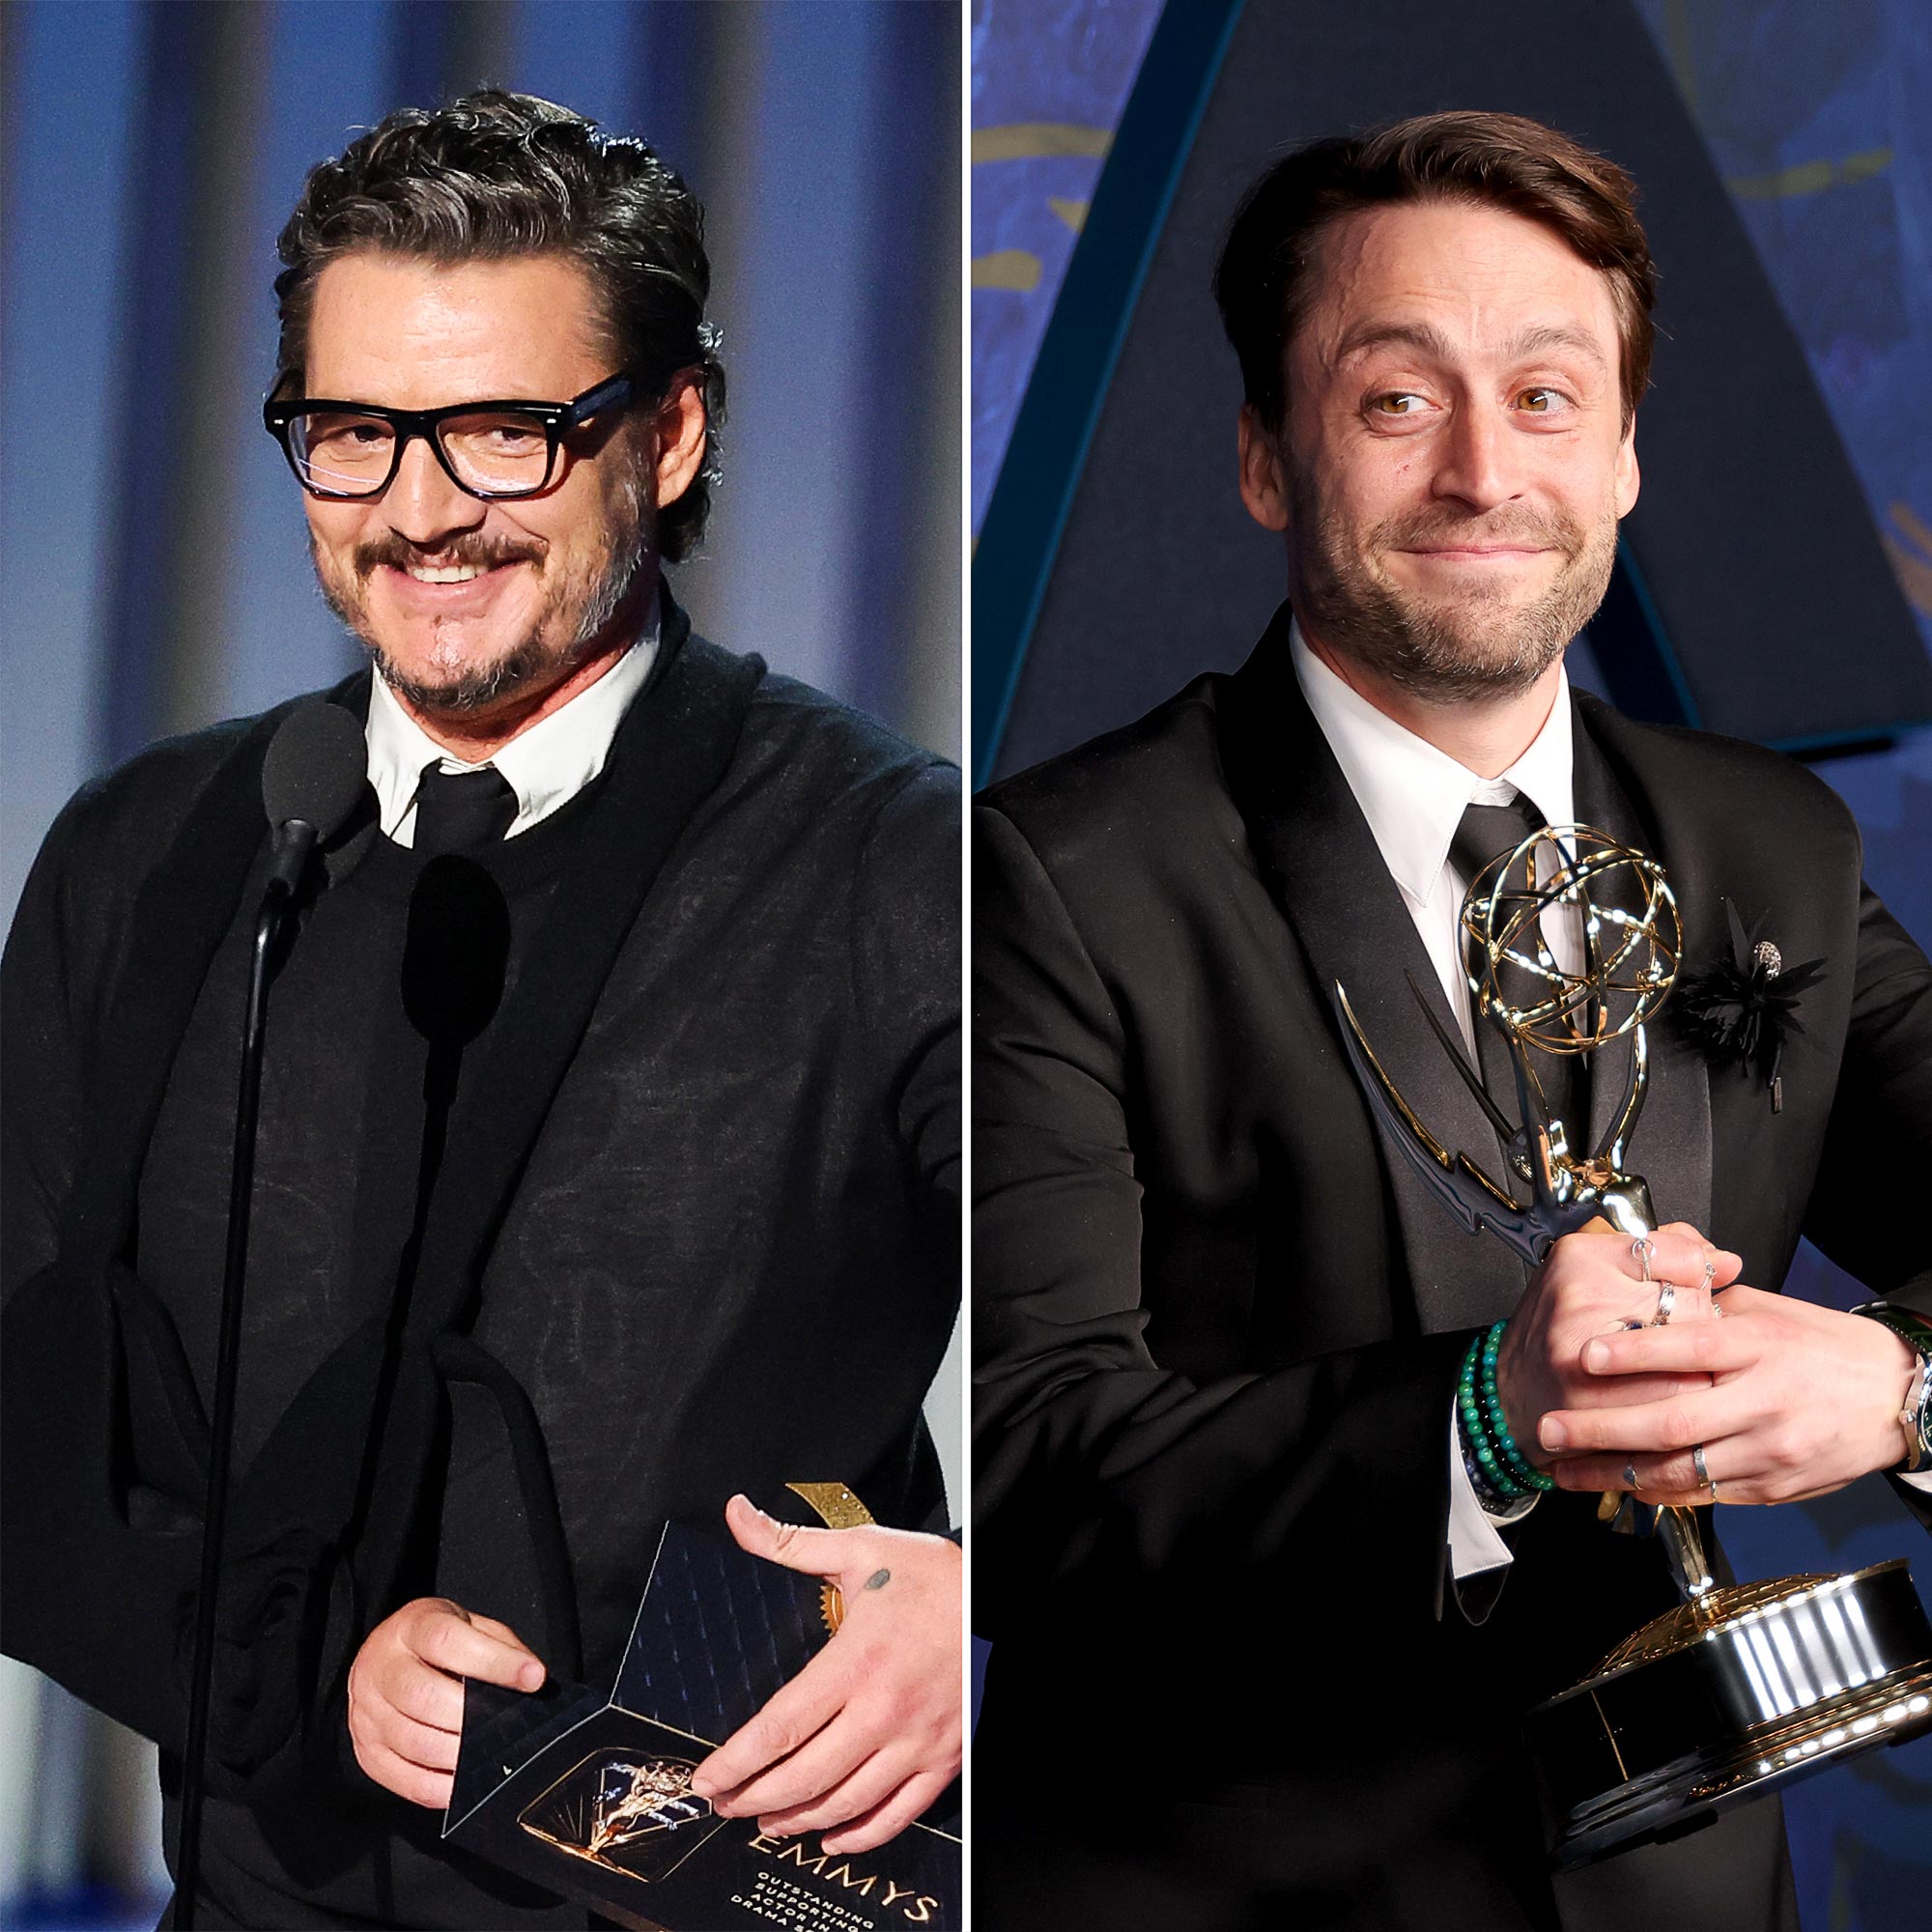 Confused About Pedro Pascal and Kieran Culkin's Feud? Us Explains the Joke